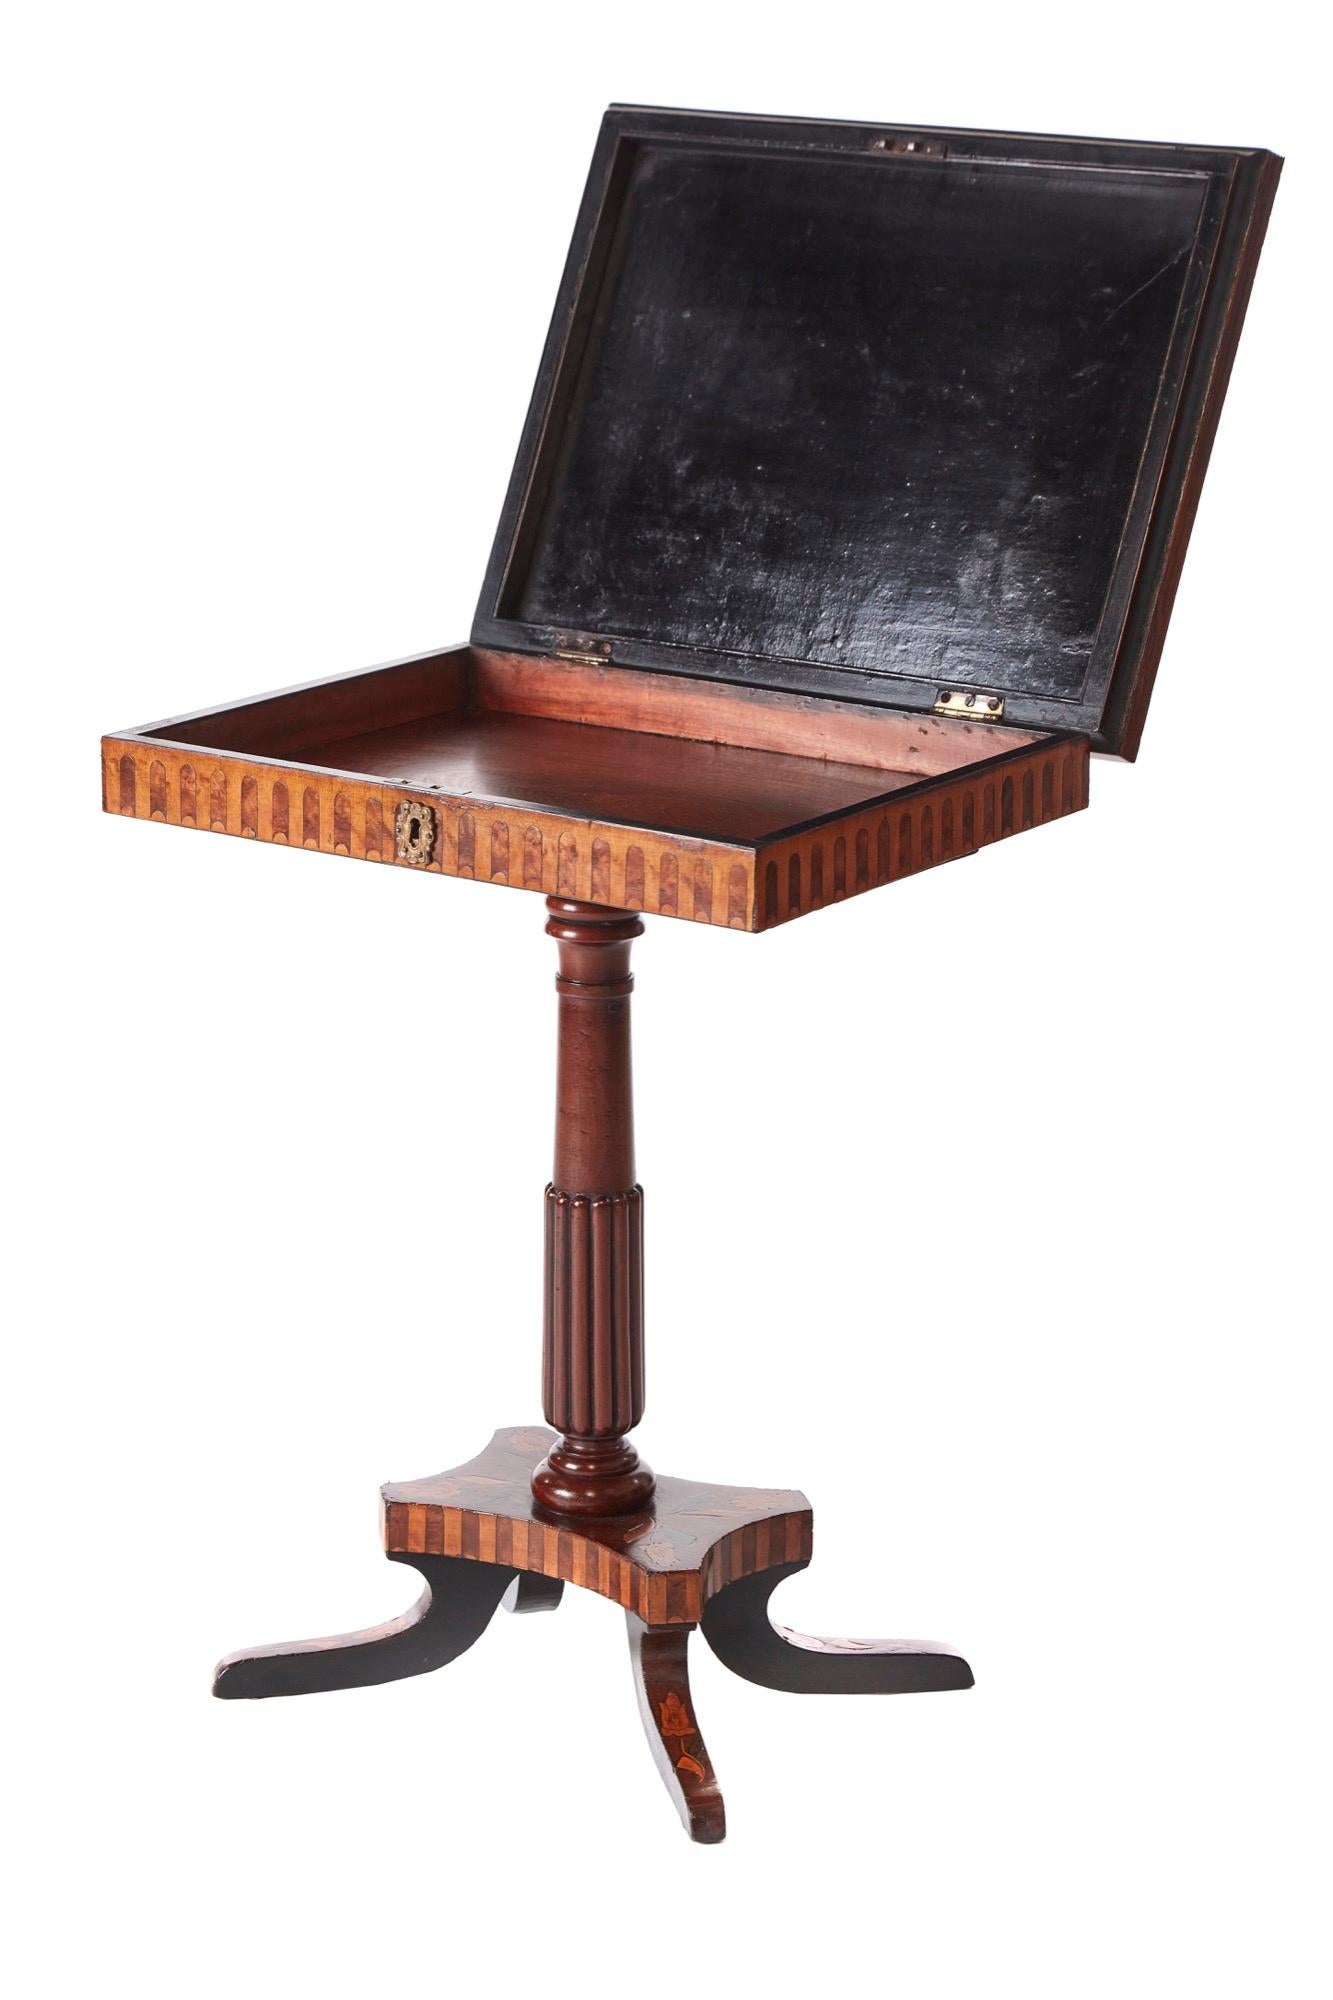 Antique walnut marquetry inlaid lamp table, having a lovely walnut marquetry inlaid lift up top, inlaid frieze, supported by a turned reeded column, standing on a inlaid shaped platform base with four marquetry inlaid sabre legs
Lovely color and